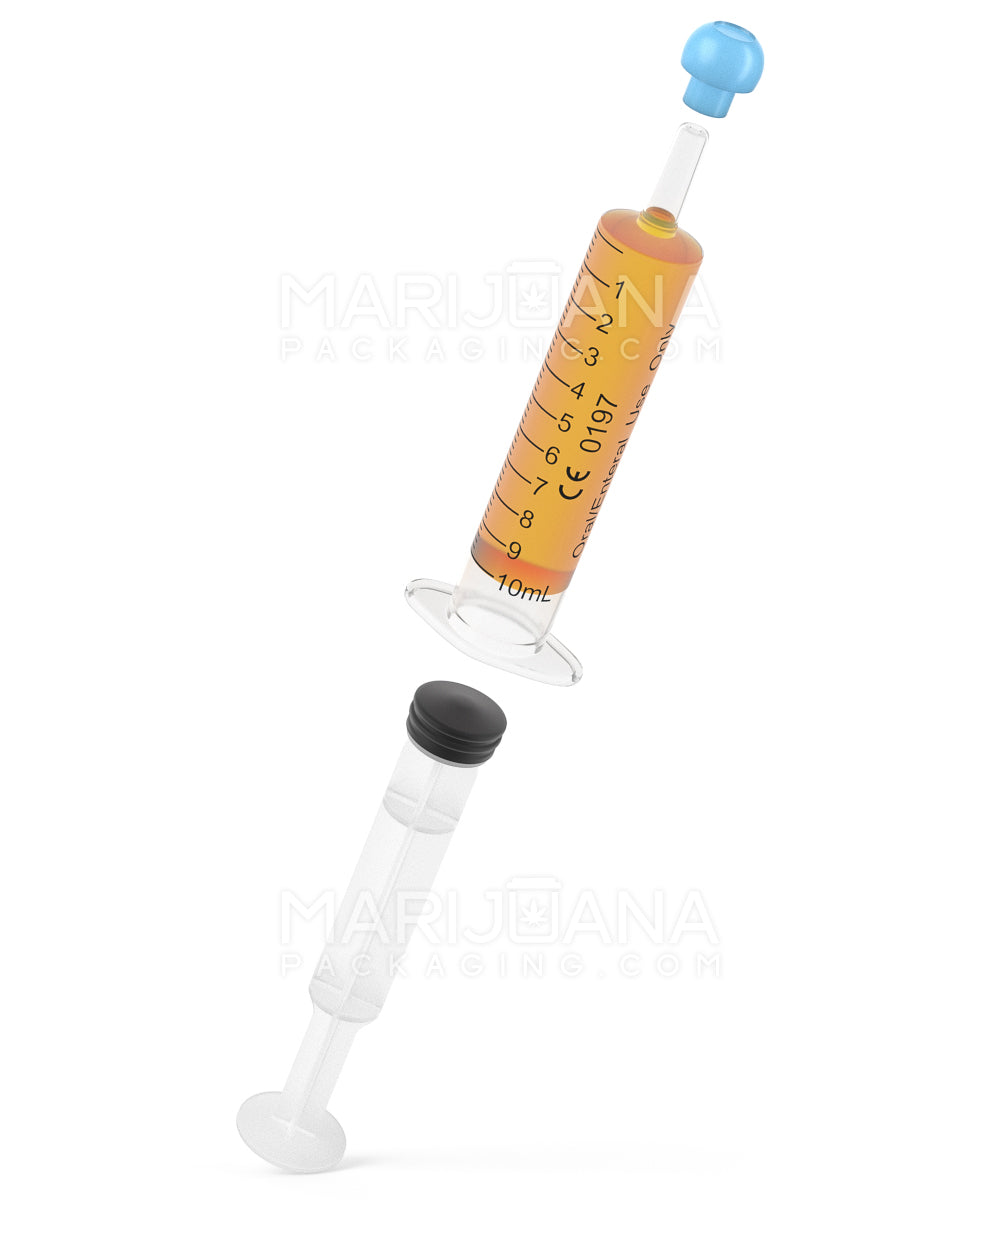 Plastic Oral Concentrate Syringes | 10mL - 1mL Increments | Sample - 7